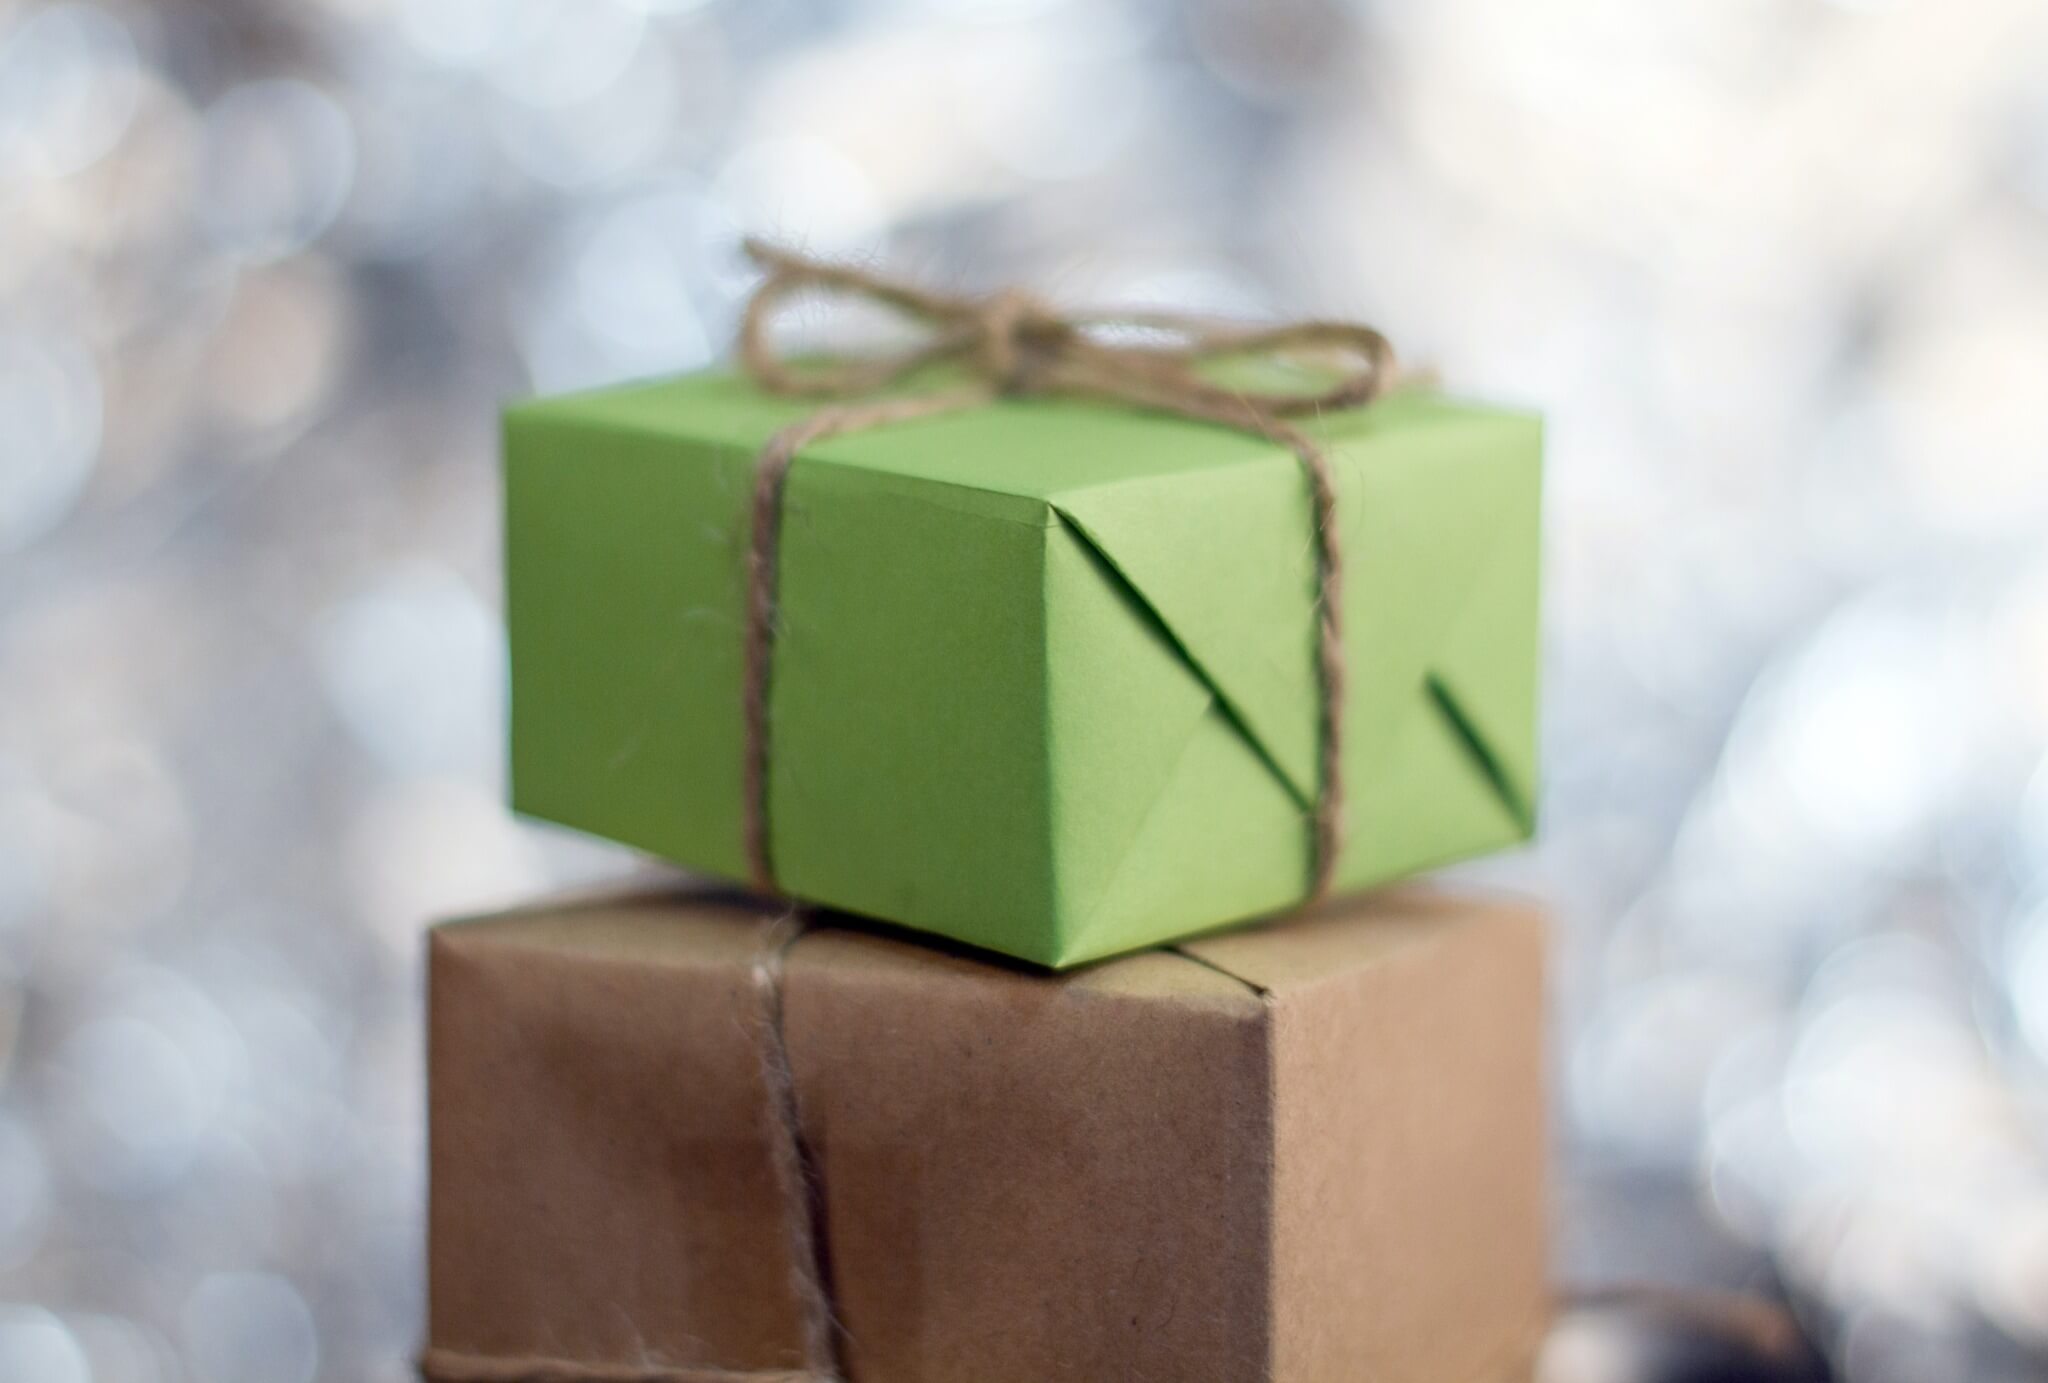 Two wrapped presents sitting on top of one another. The bottom present is wrapped in brown kraft paper. The top present is wrapped in green paper.